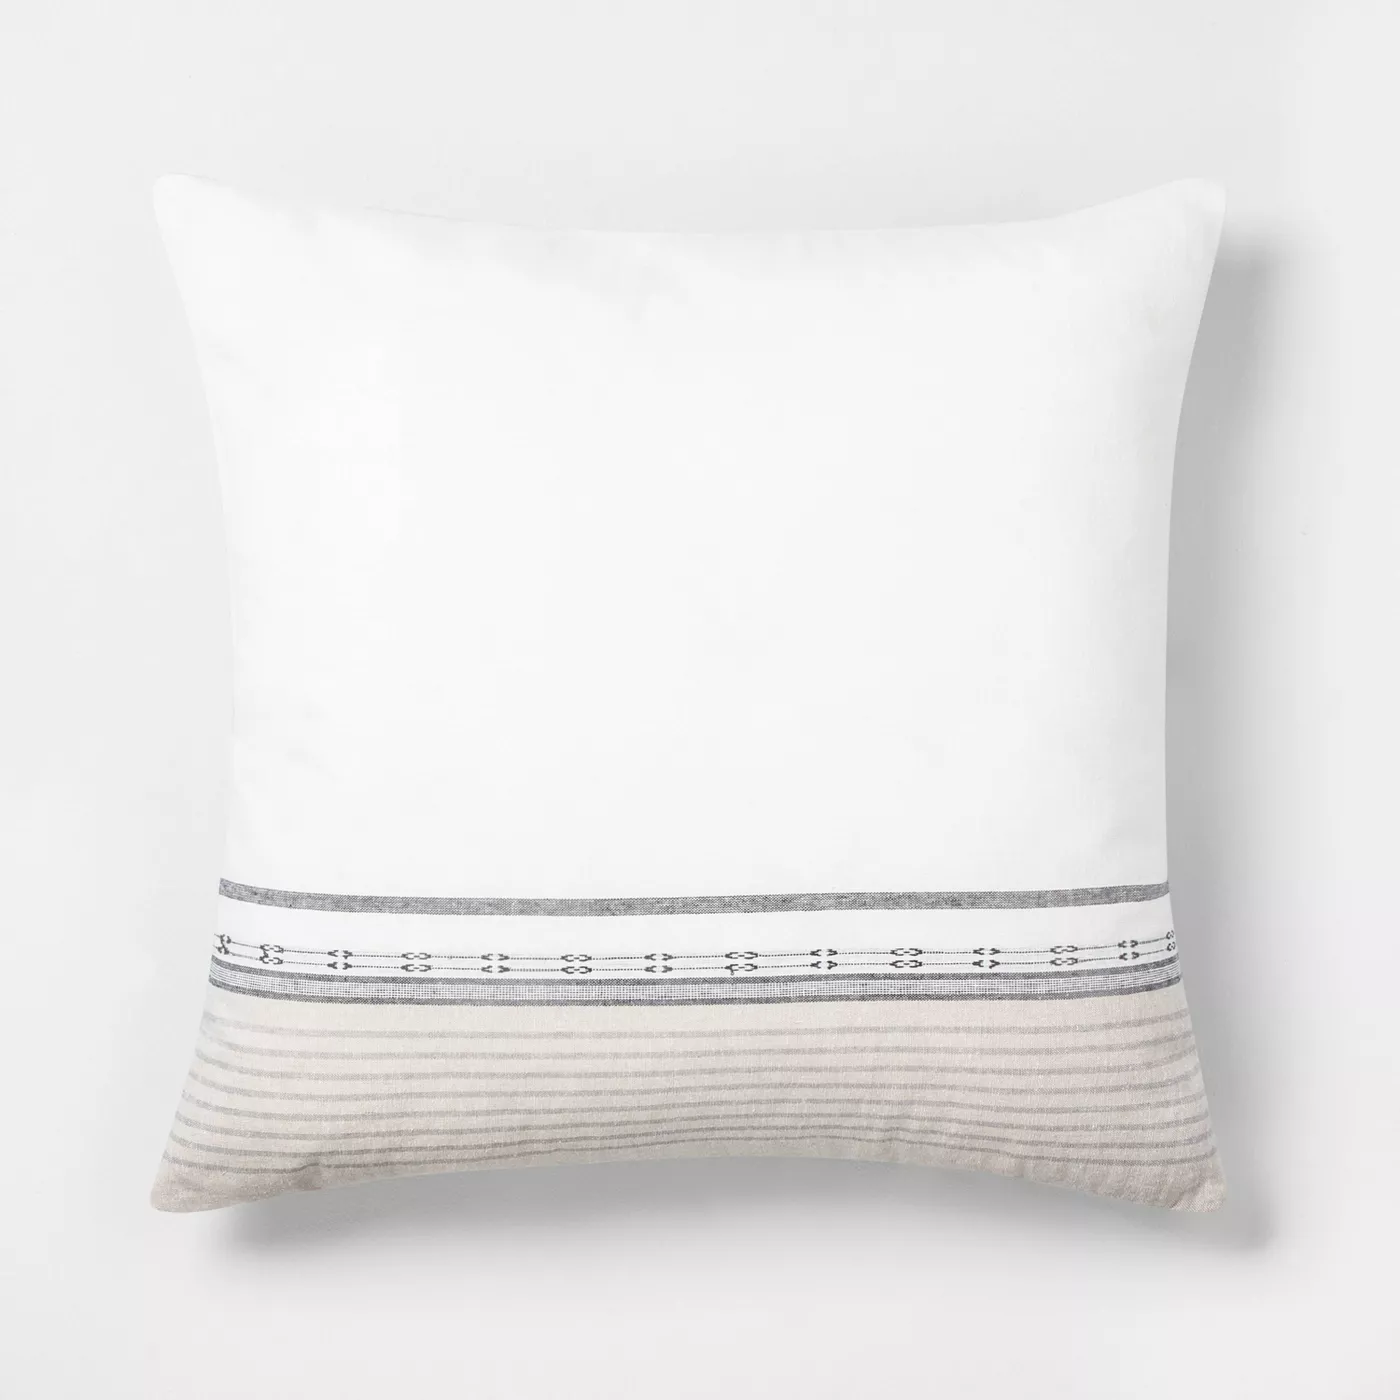 Shop Ombré Stripe Throw Pillow - Hearth & Hand from Target on Openhaus